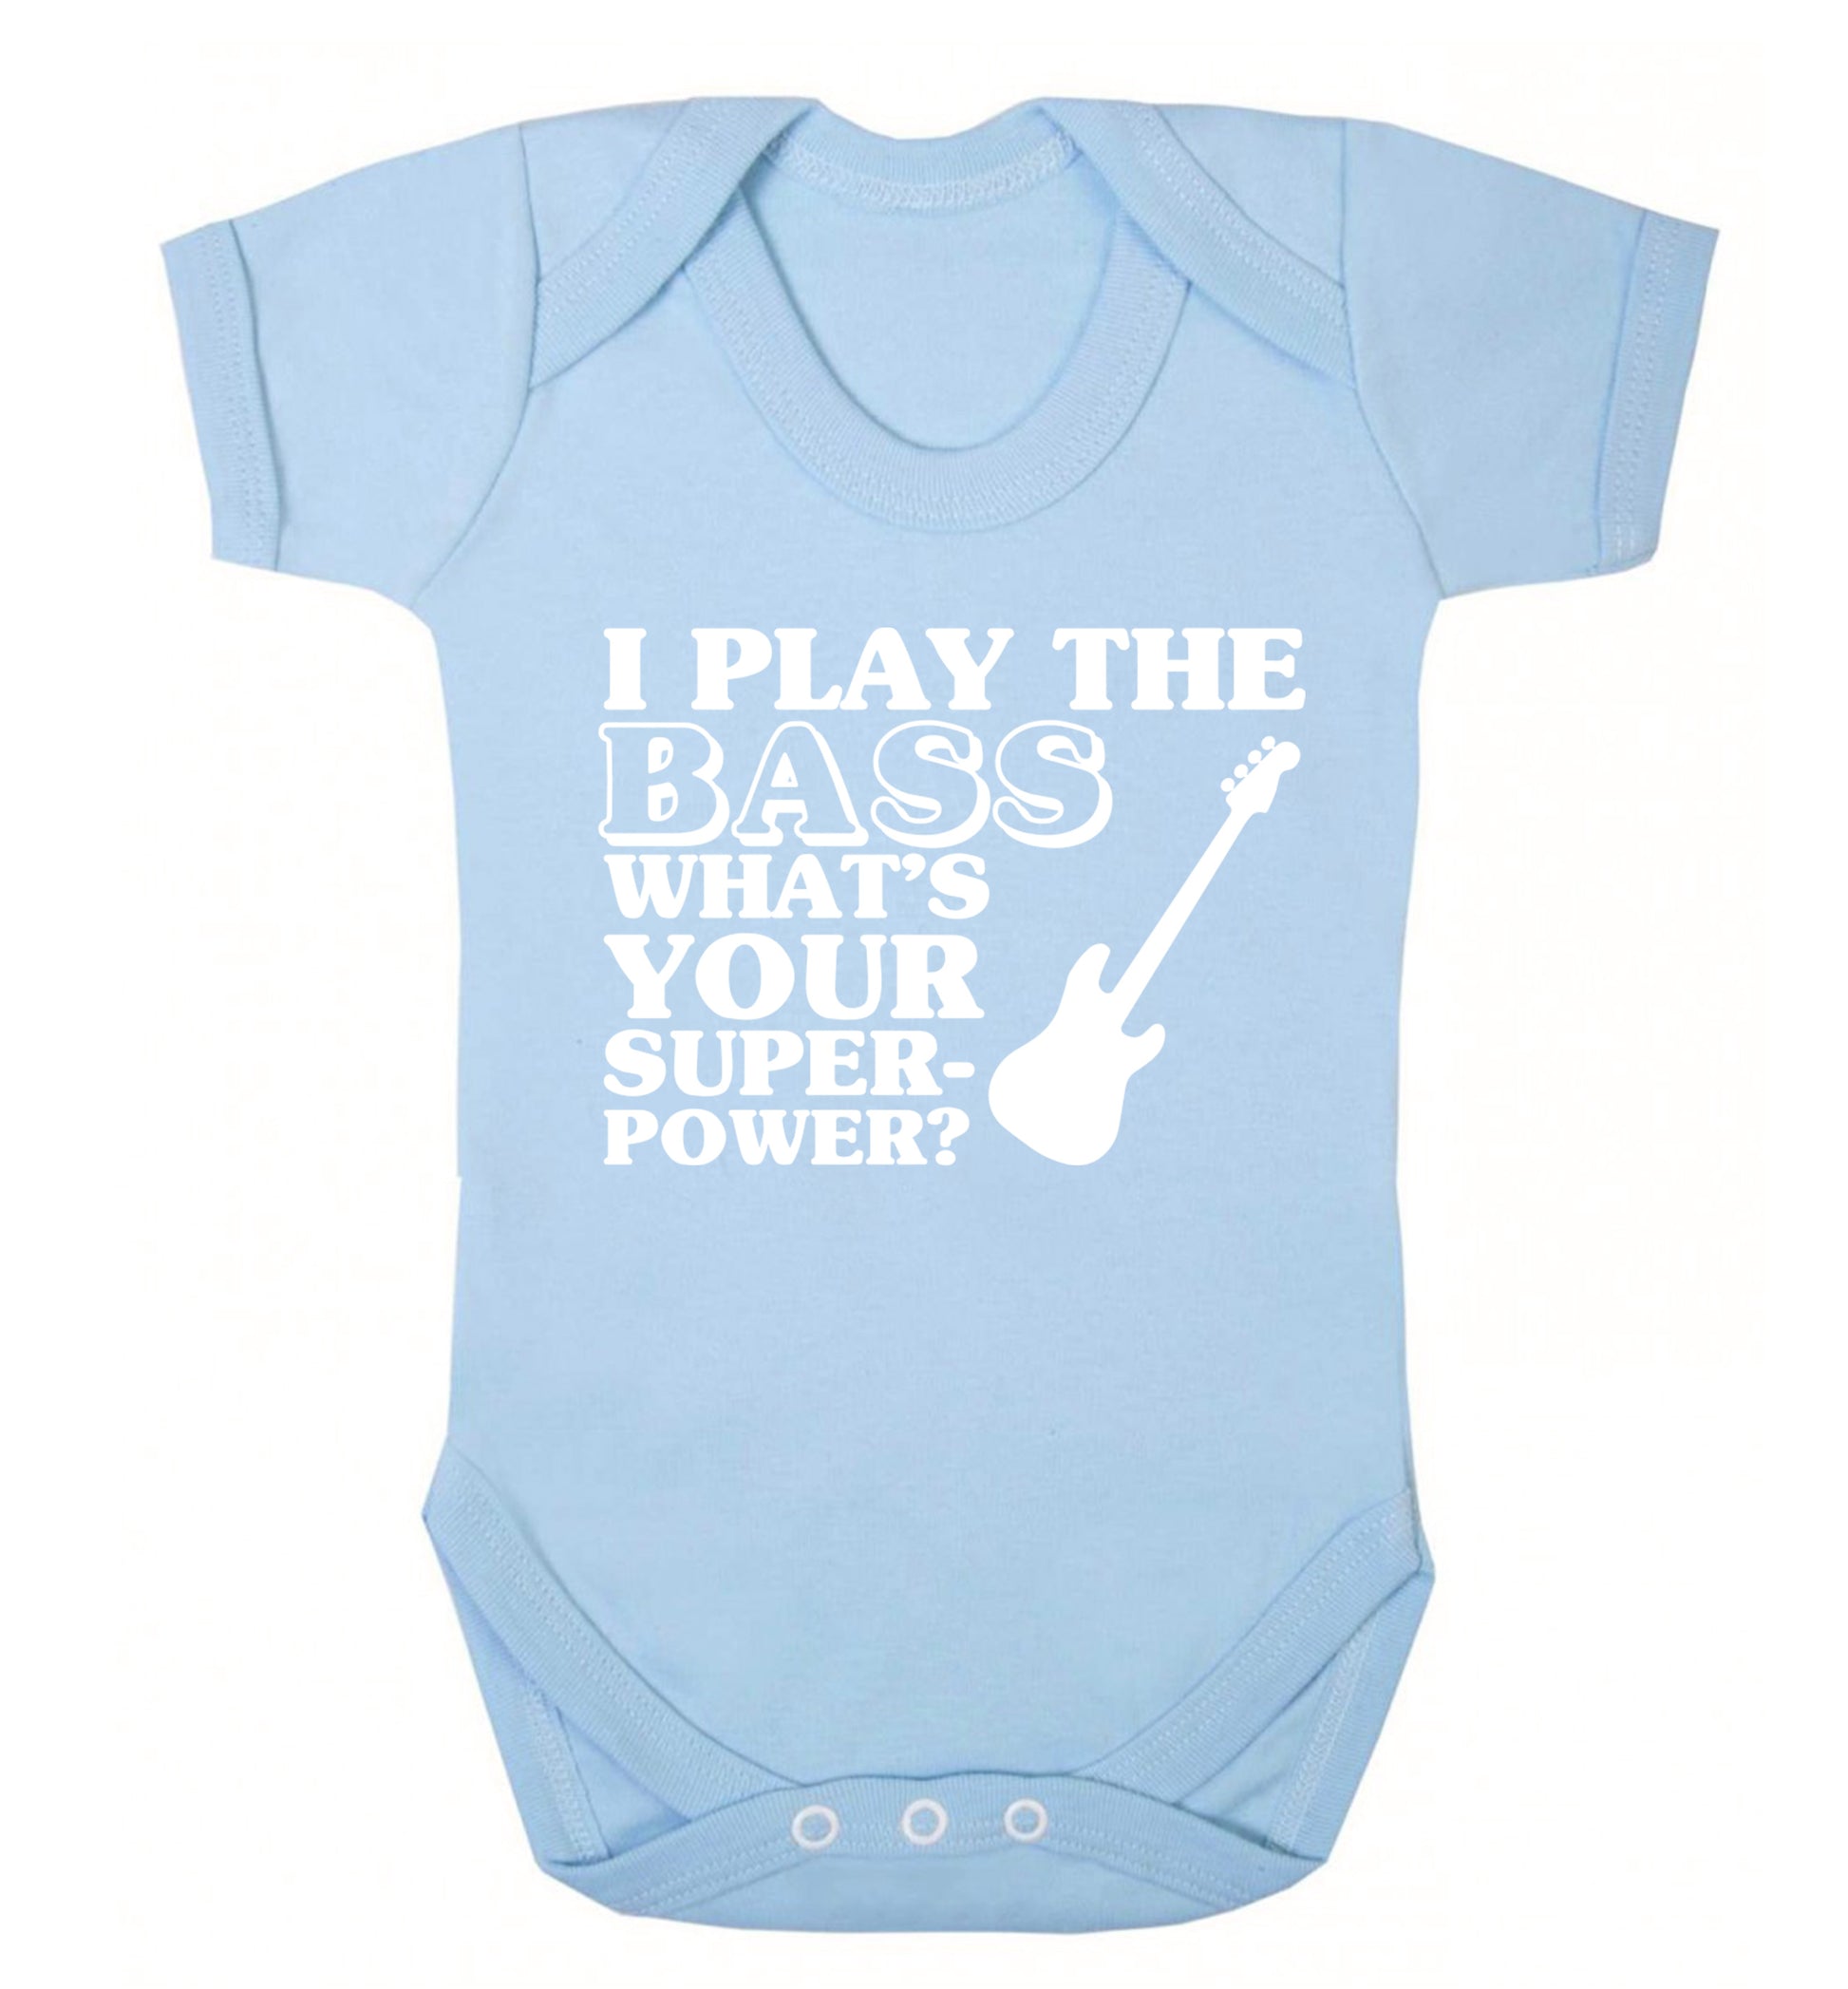 I play the bass what's your superpower? Baby Vest pale blue 18-24 months